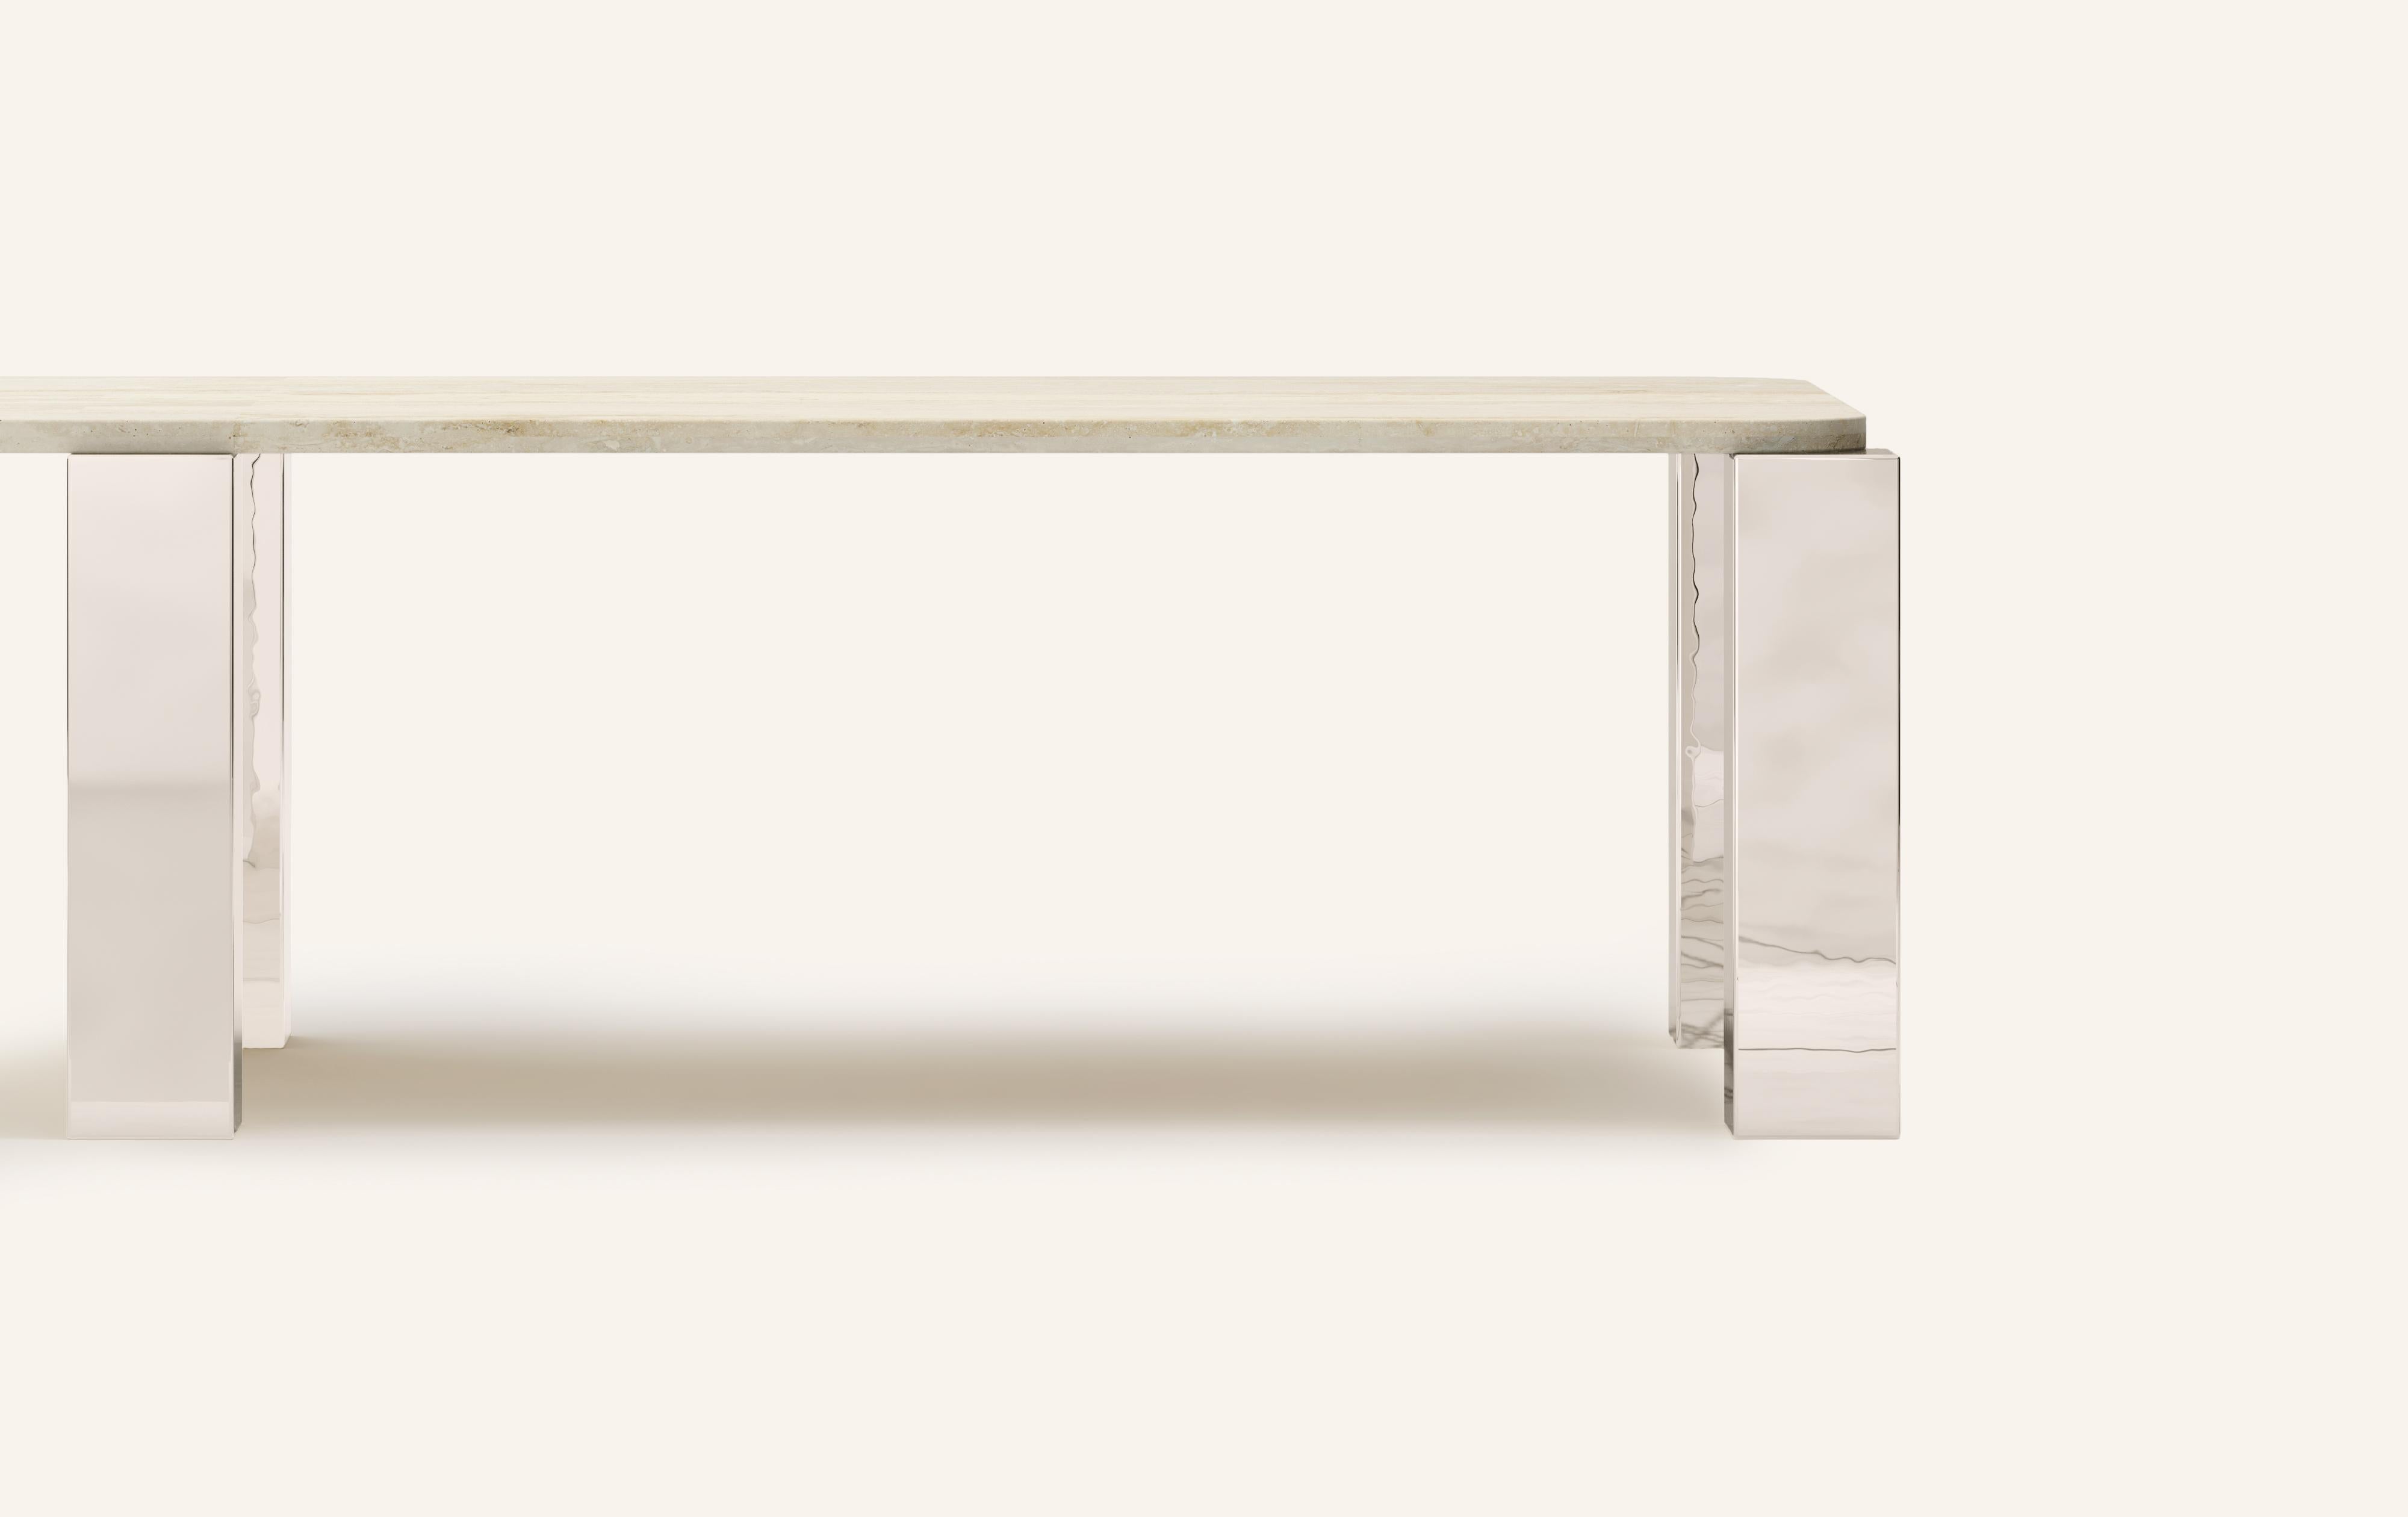 American FORM(LA) Cubo Rectangle Dining Table 146”L x 50”W x 30”H Travertino & Chrome For Sale